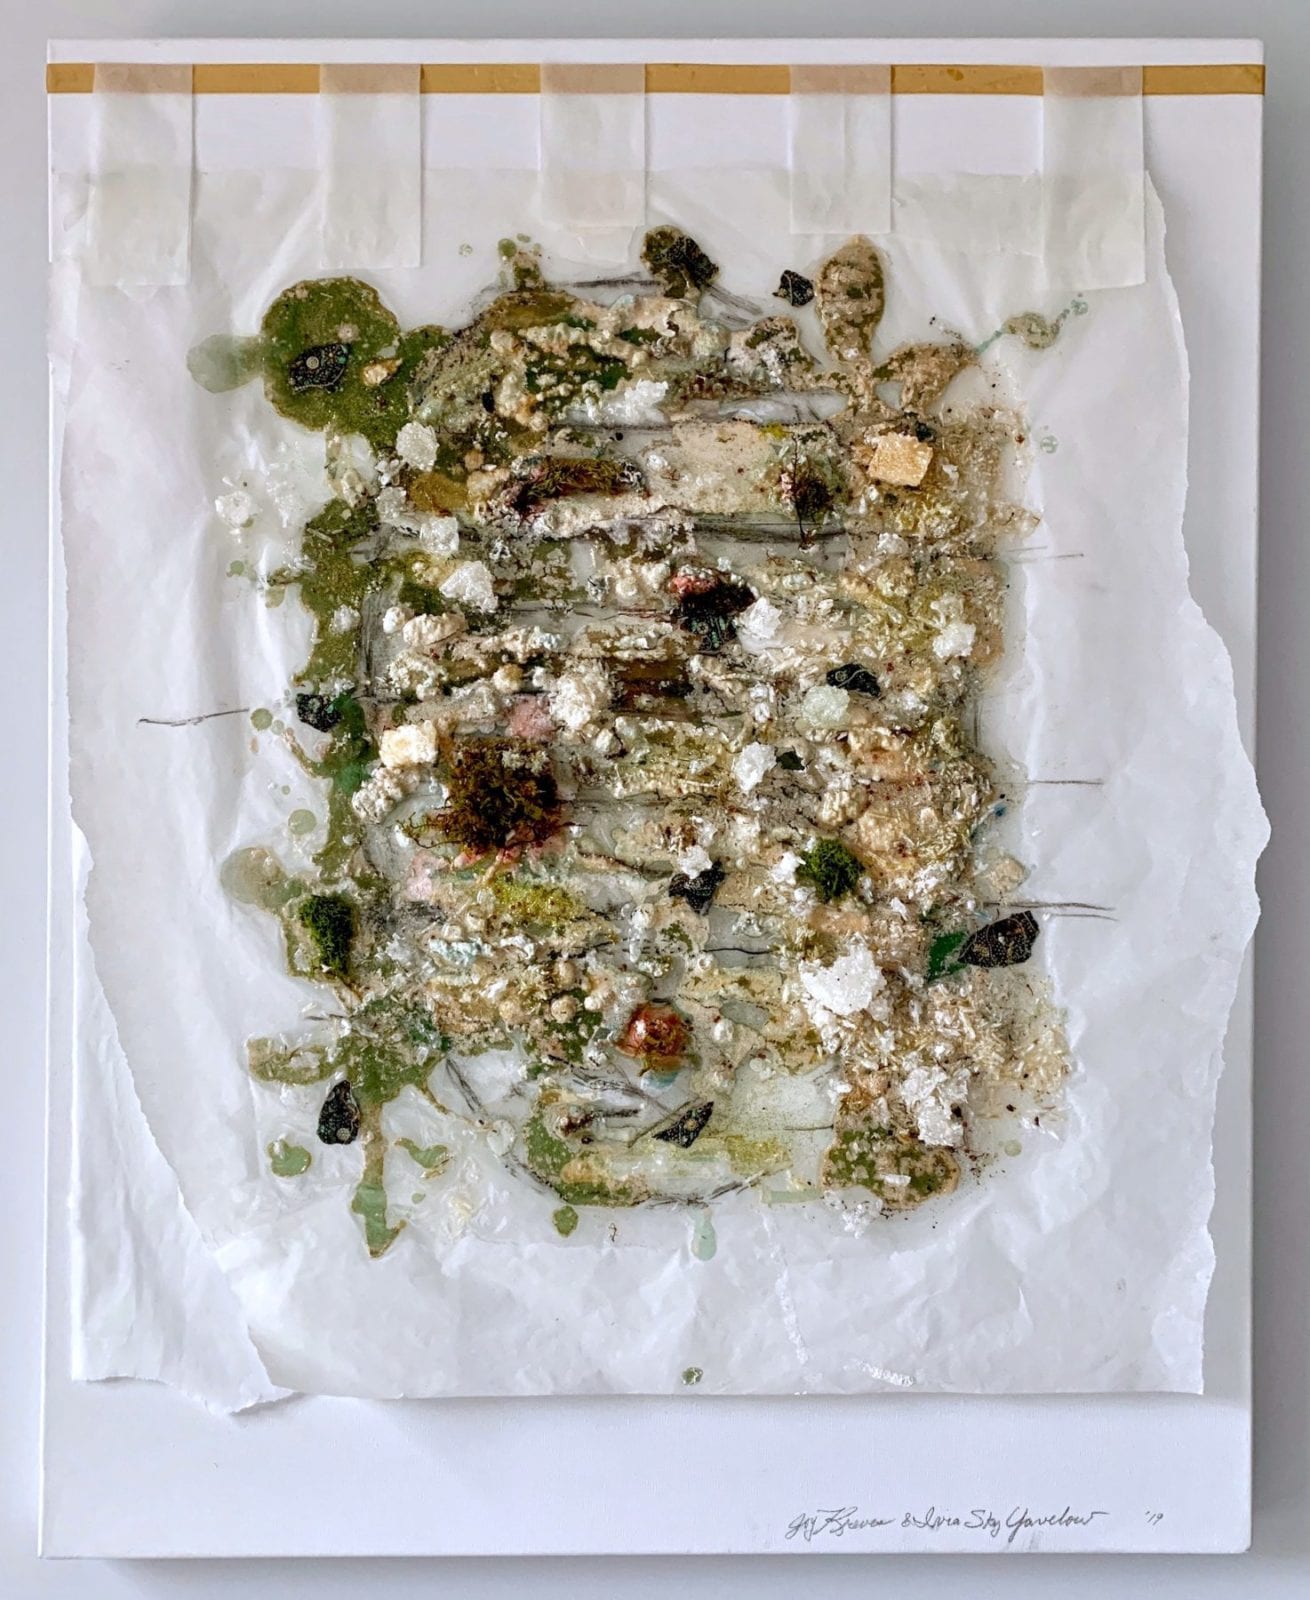 Joy Kreves and Ivia Sky Yavelow, Aftermath, charcoal, salt wash, moss, collage and resin on tracing paper on canvas, 30 x 24 inches